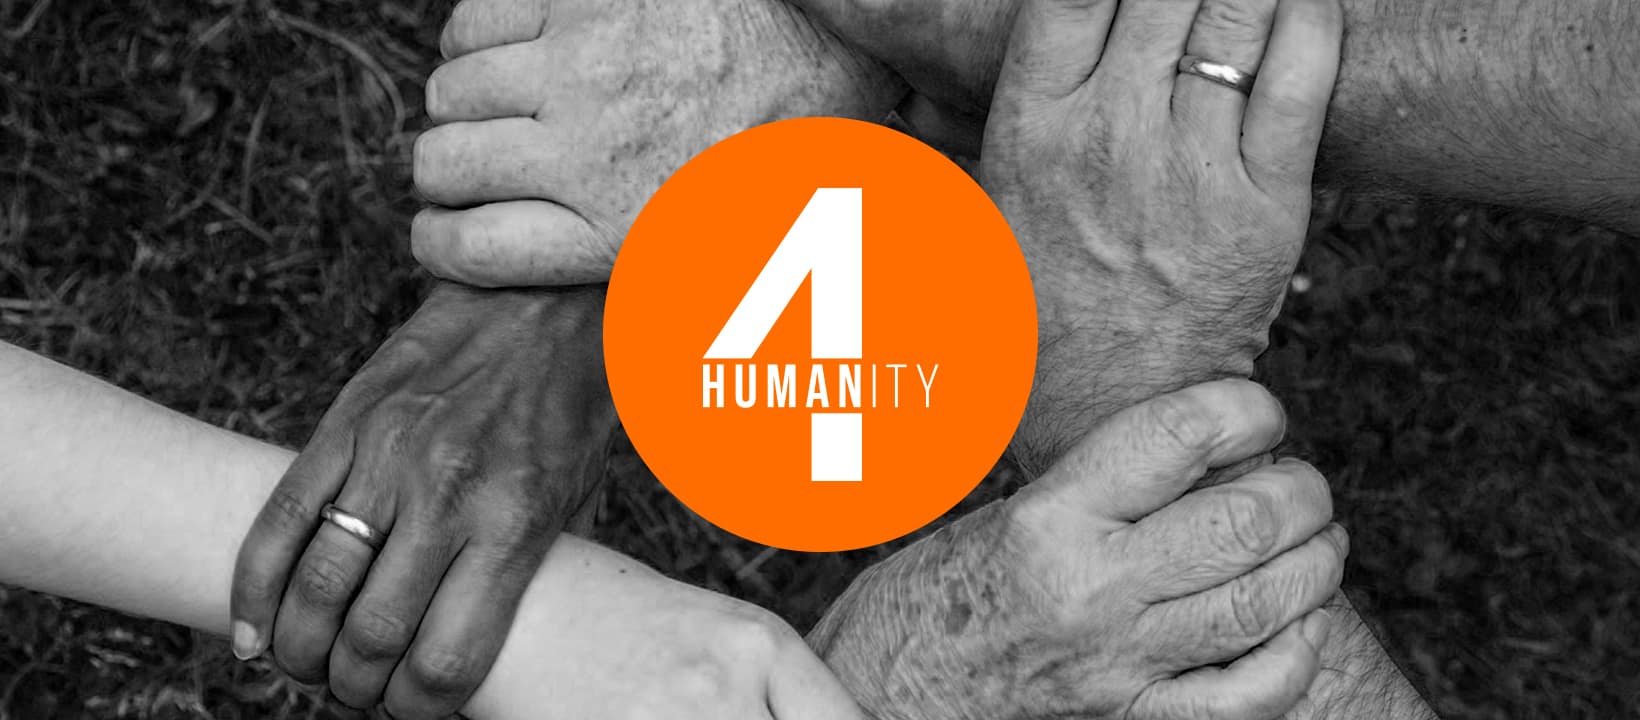 4 Humanity Facebook Cover